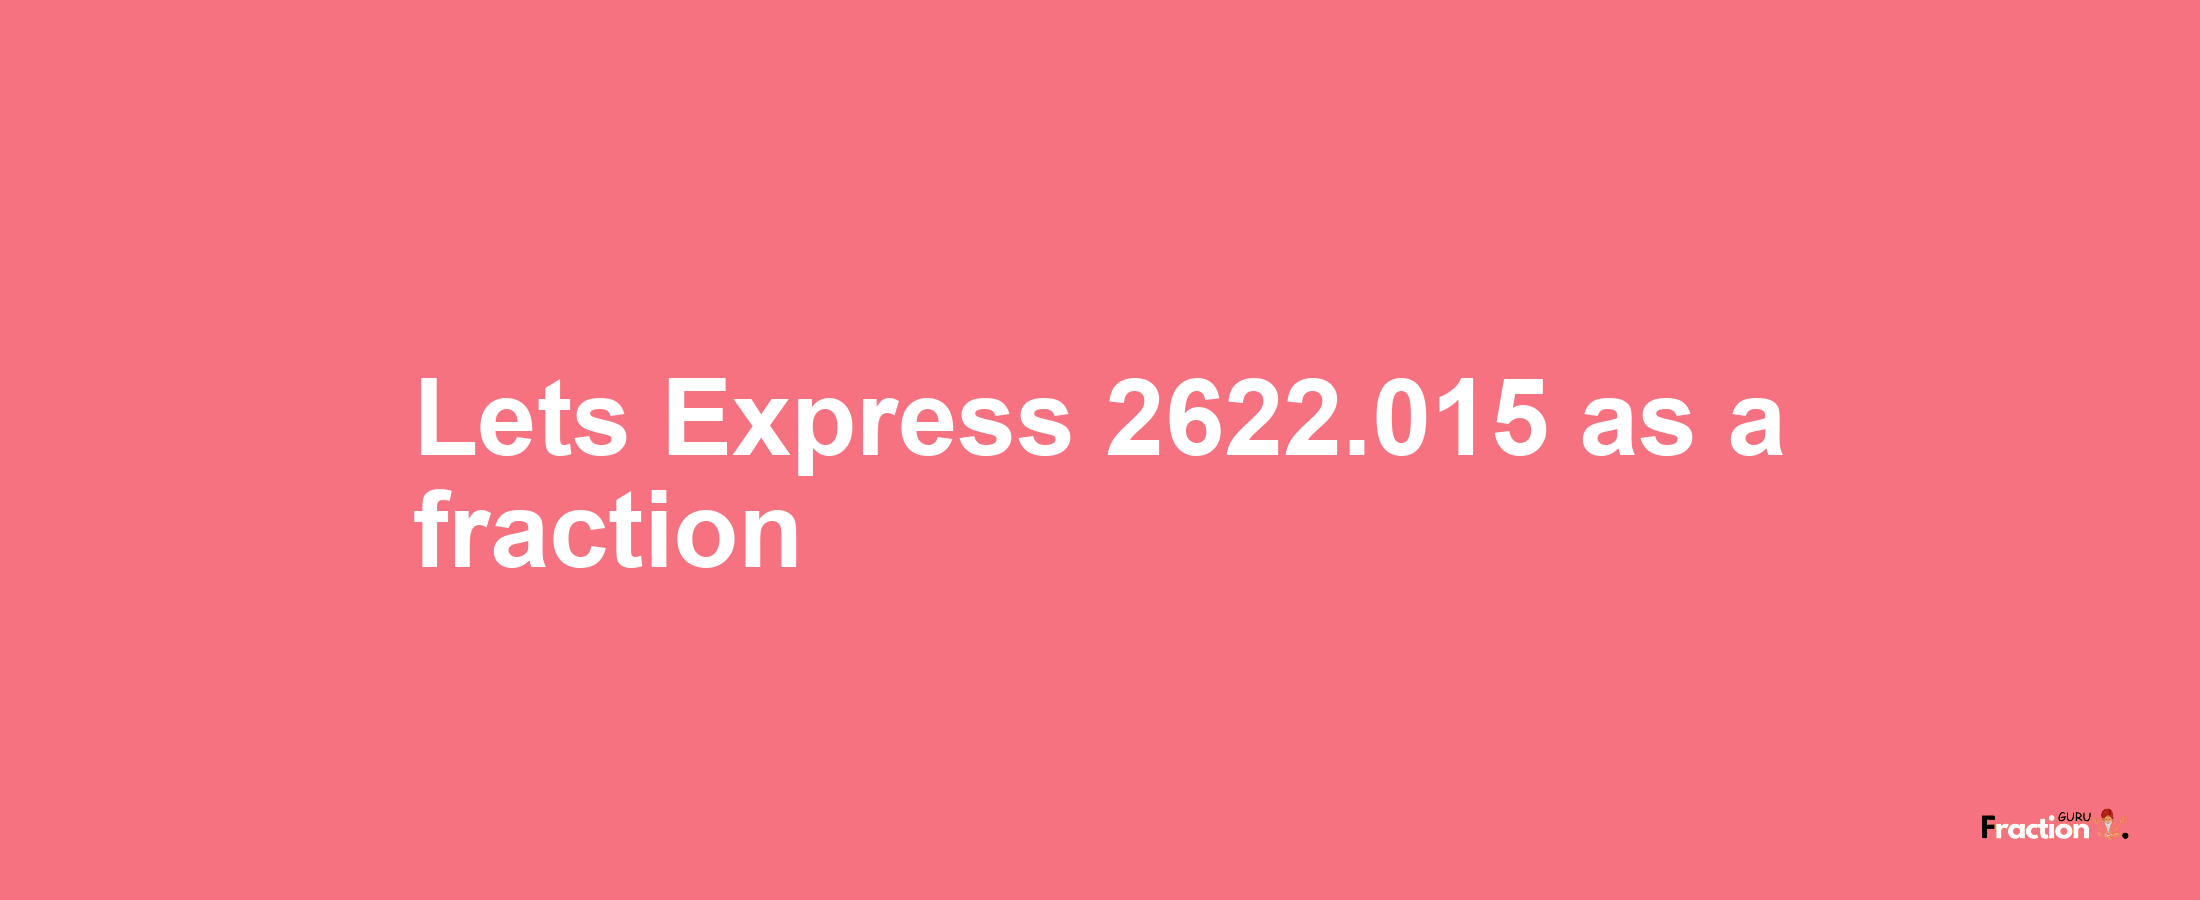 Lets Express 2622.015 as afraction